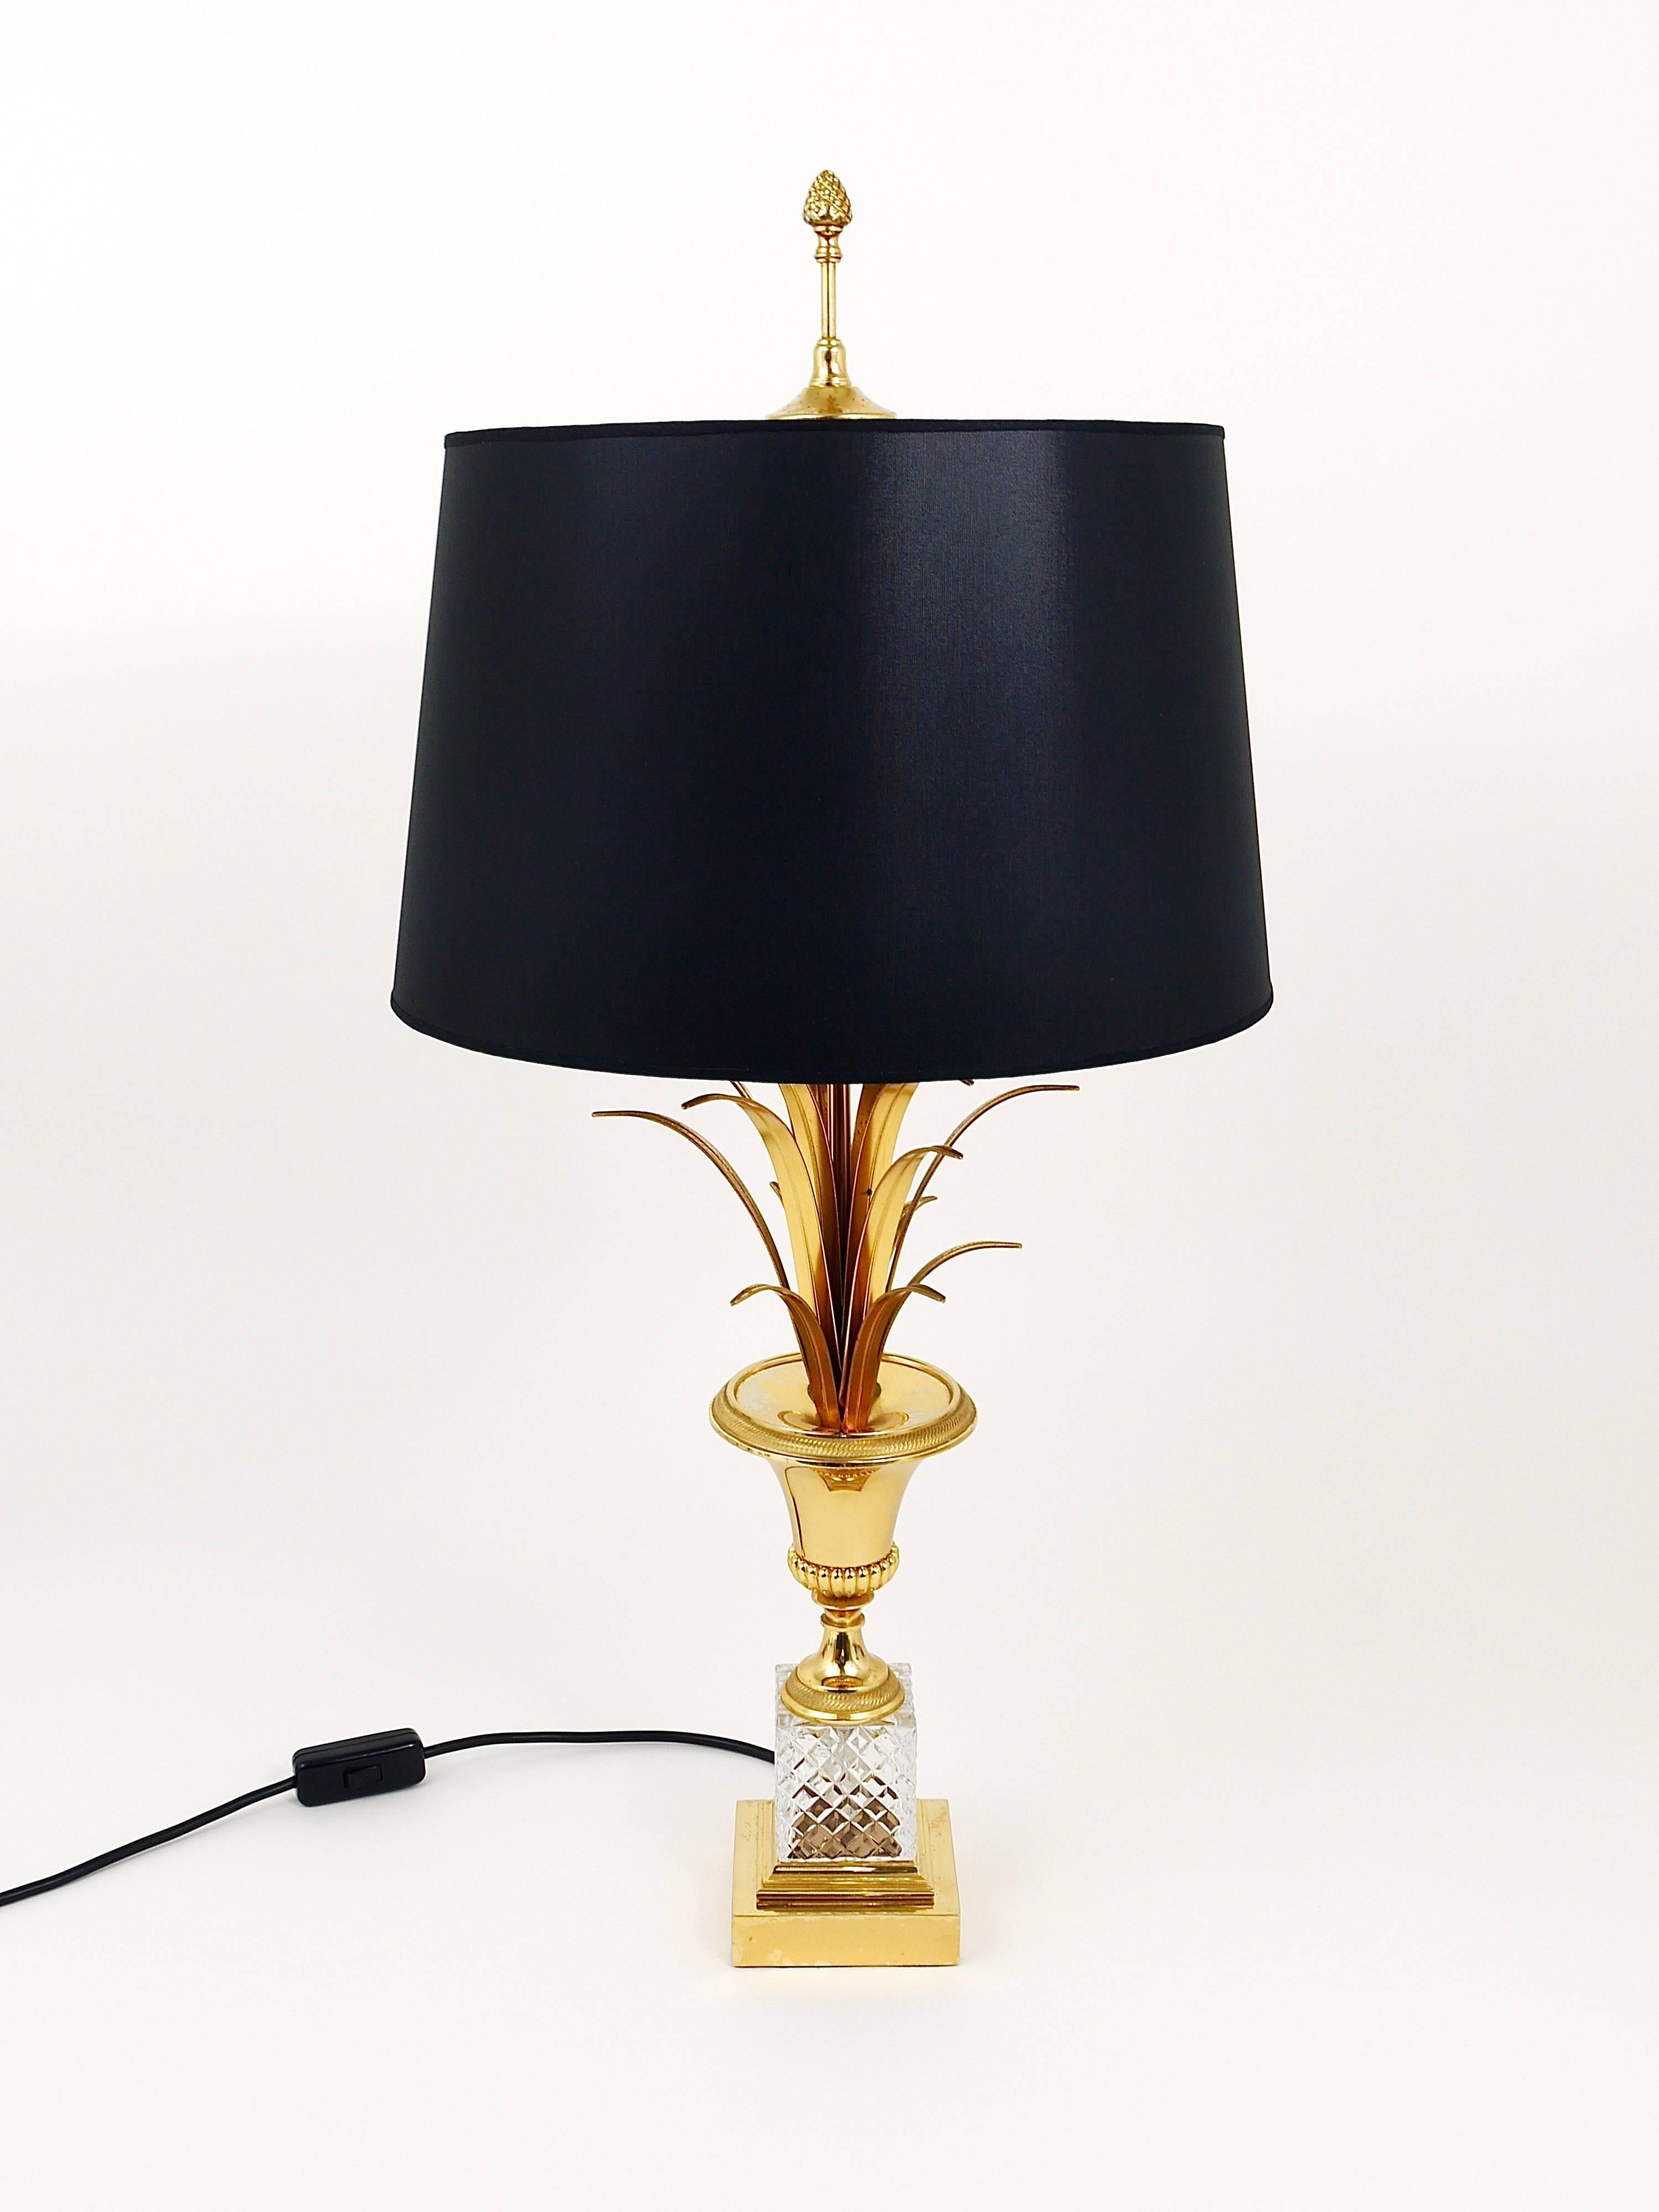 Gold Hollywood Regency Pineapple Leaf Gilt Brass and Glass Table Lamp, France, 1970s For Sale